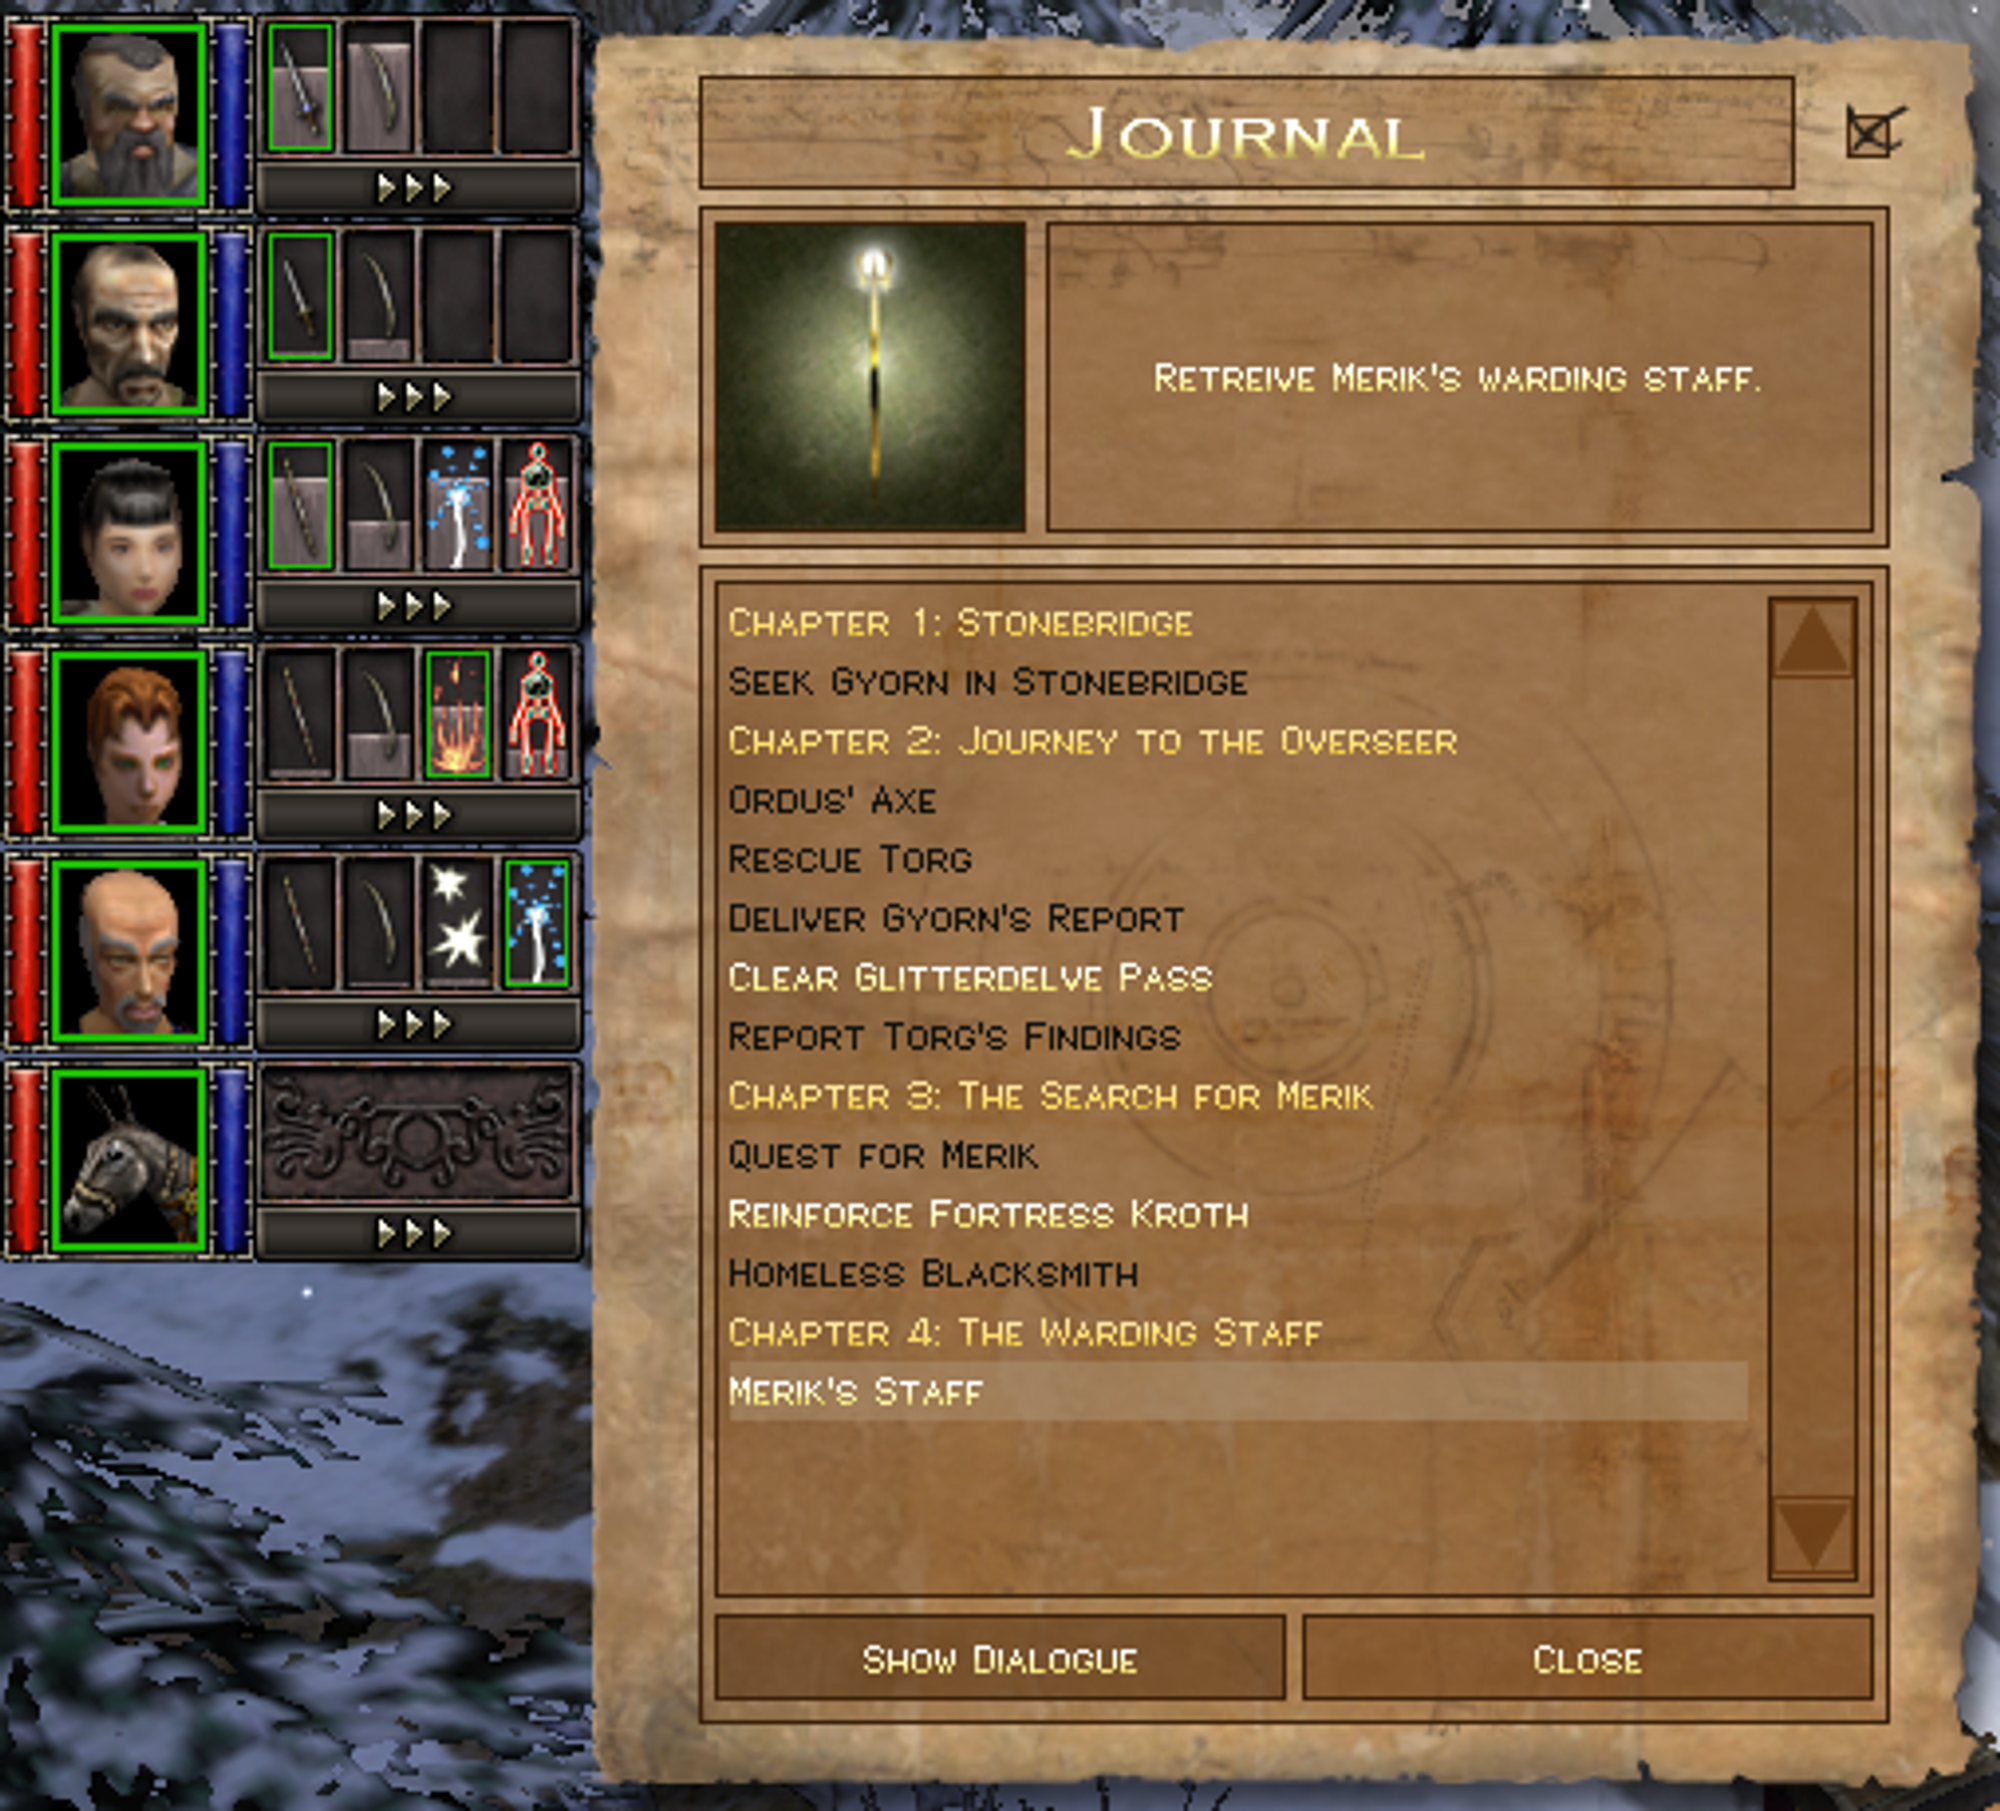 Perhaps one of the weakest elements in the game, the quest journal doesn't really give you much guidance.  It does let you re-listen to the dialog from when the quest was assigned, but I did not see any quest direction indicators or often even "go north" hints in the dialog and I just had to wonder and hope that the game was linear enough that I wasn't going the wrong way for hours.  Also, it allows you to walk right past the goals of your quests, requiring you to circle back.  The only advantage you have is that enemies don't respawn and the world state never resets, so you know you are circling back because of all the dead bodies around and the already gathered treasures from chests, etc.  